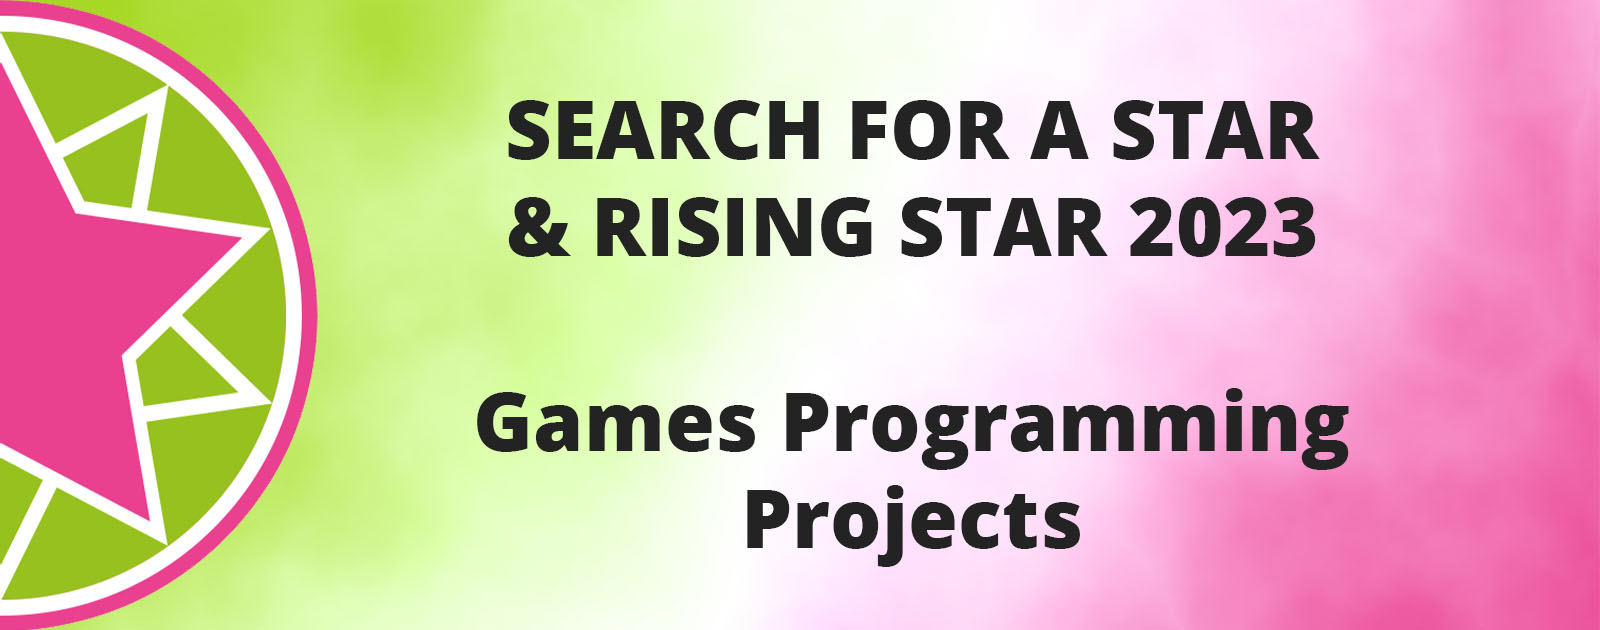 Games Programming Projects | SFAS23